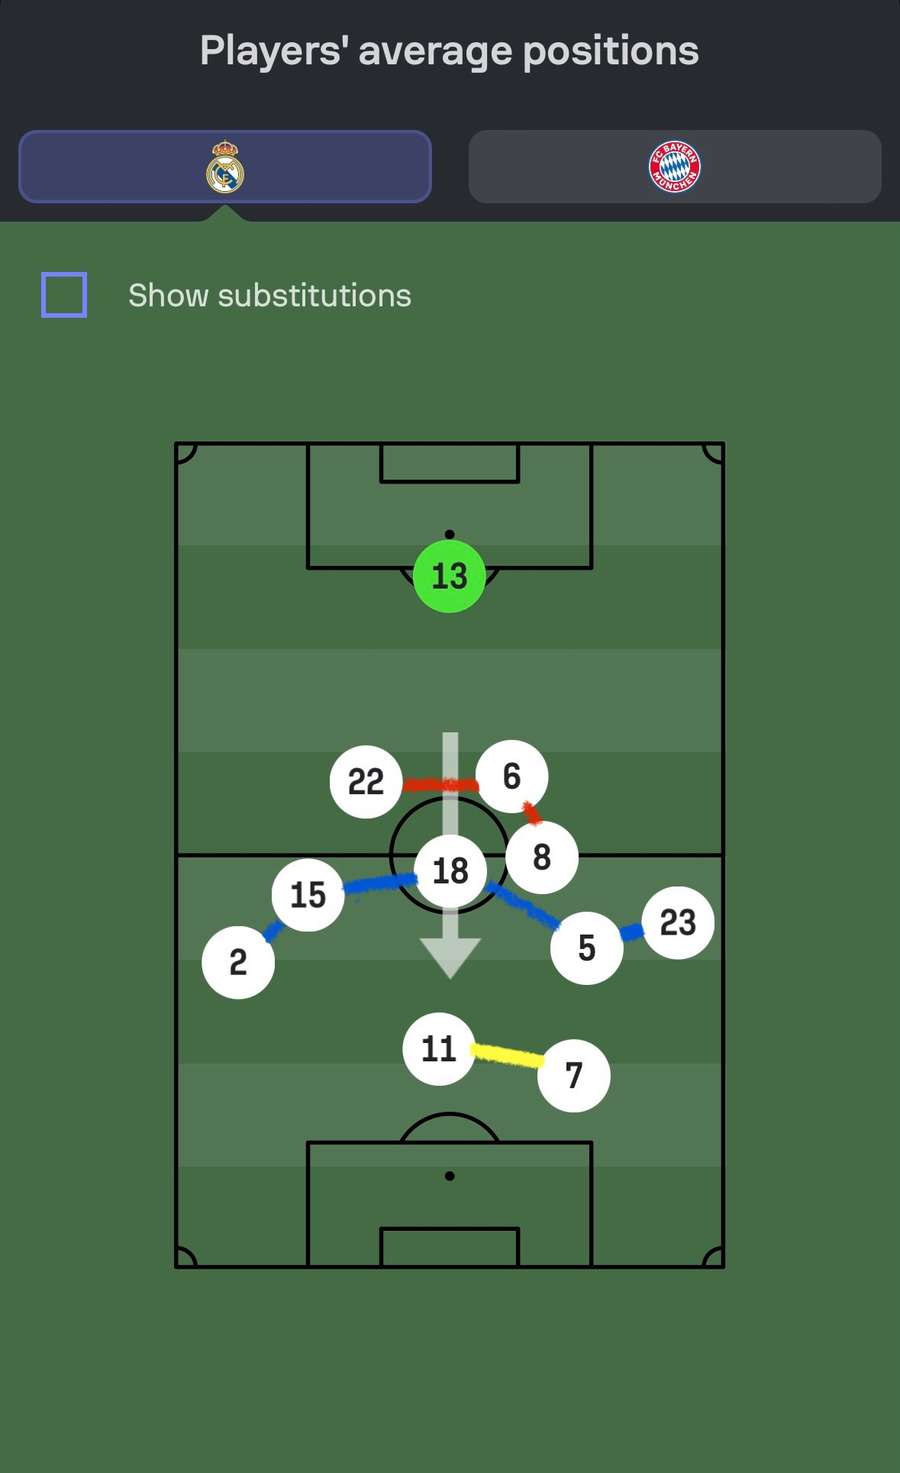 Real Madrid's average position